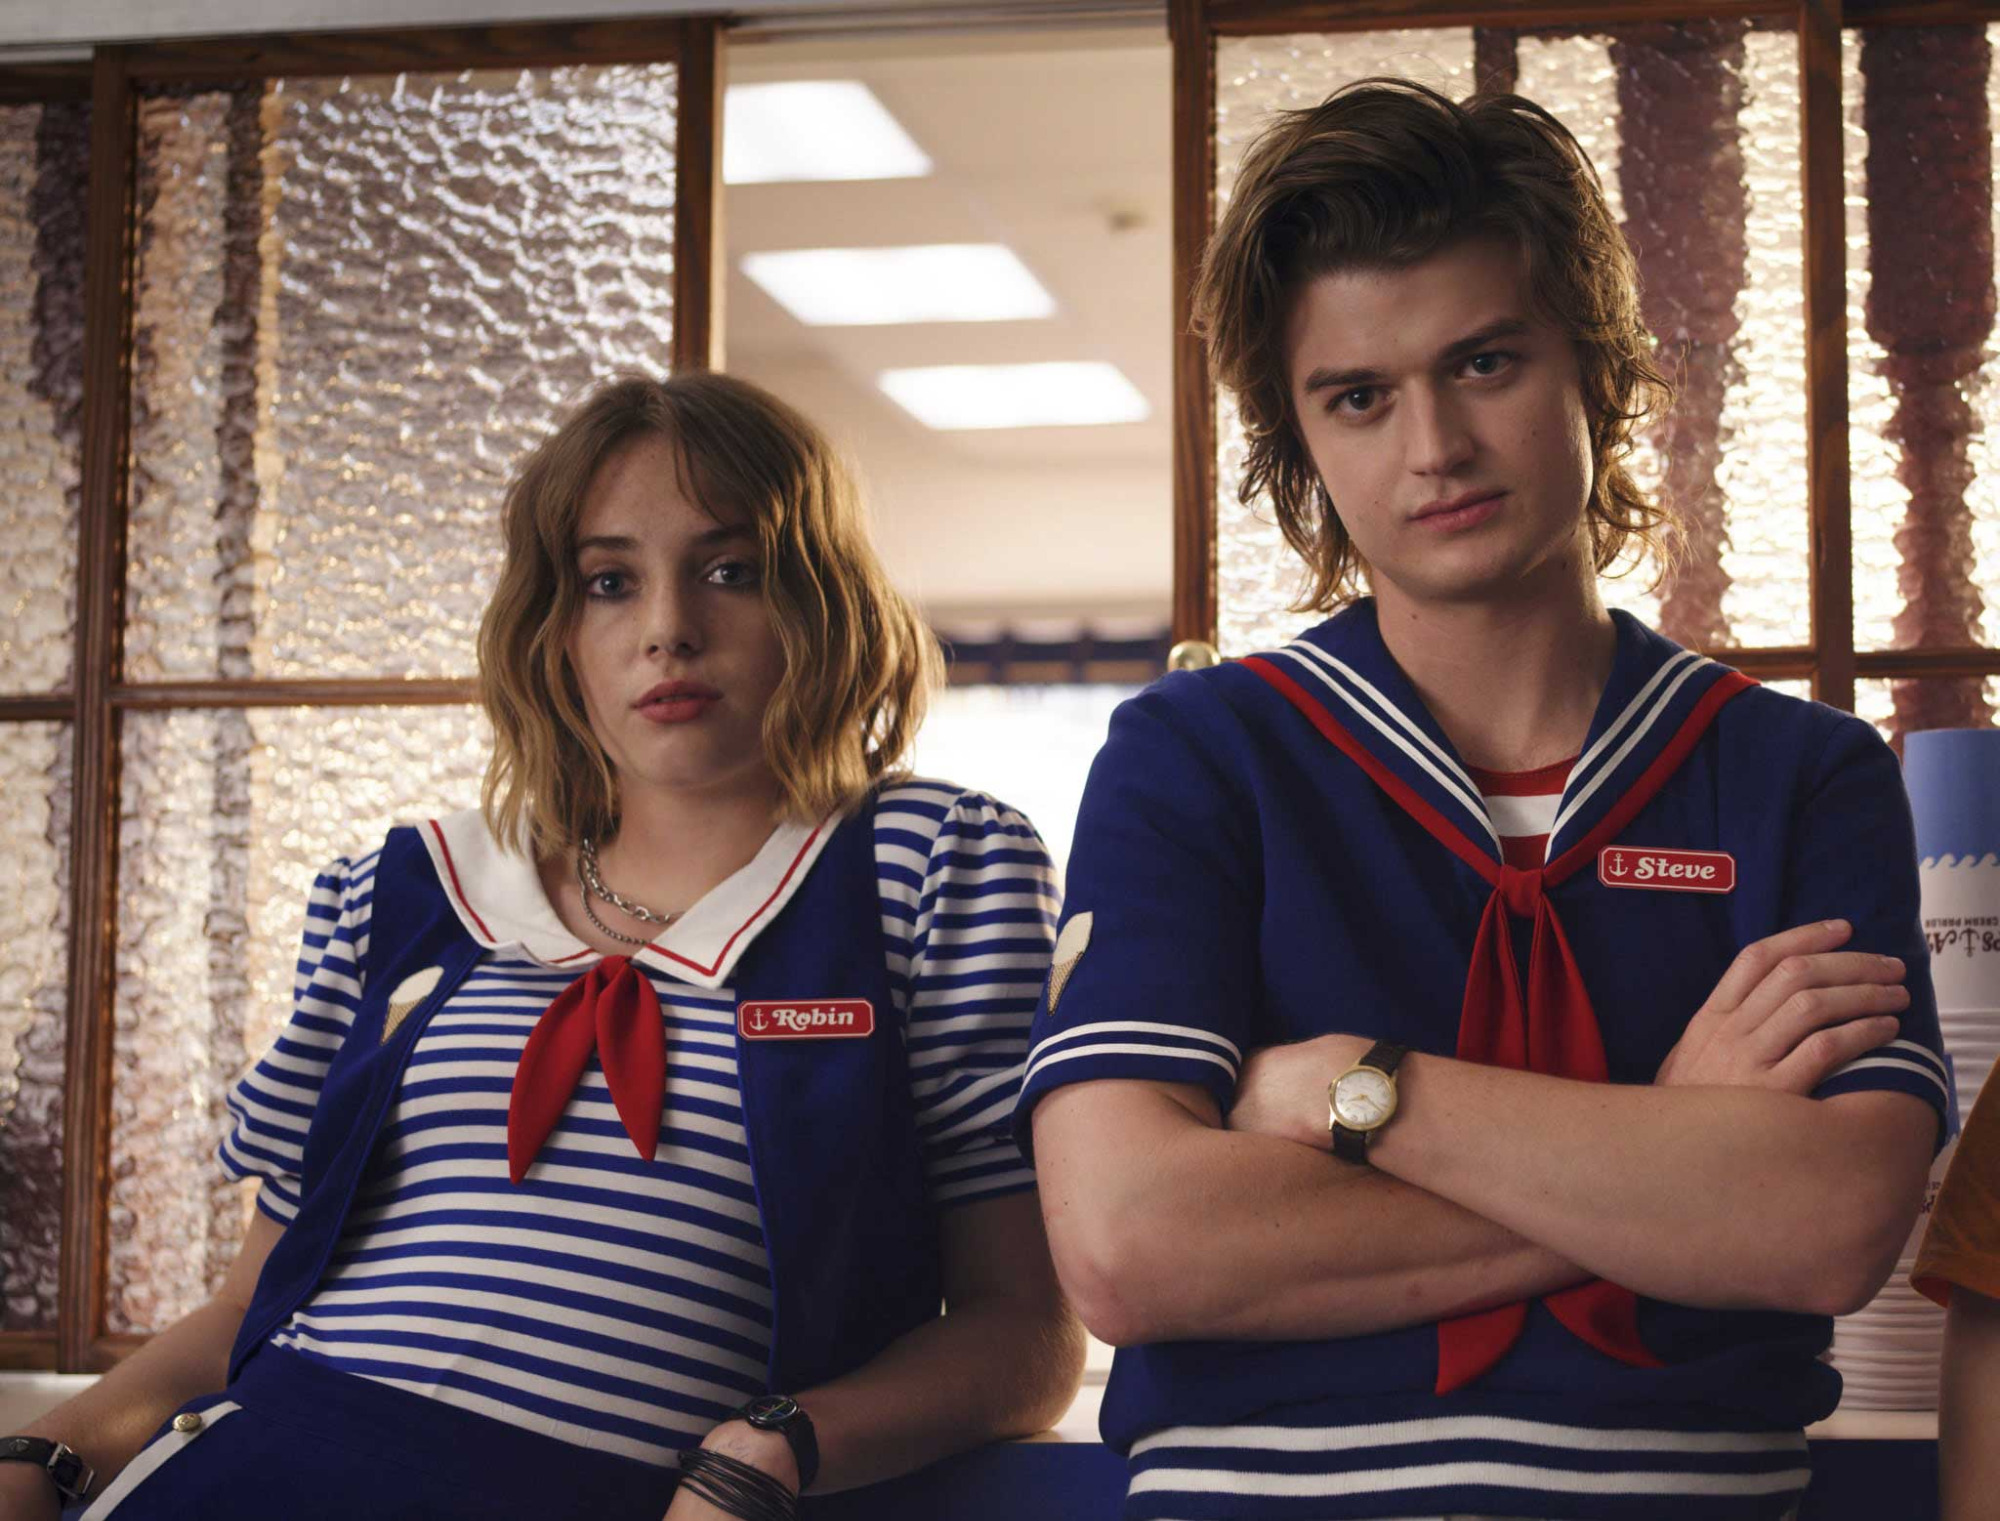 Stranger Things Season 3 Robin Scoops Ahoy Cosplay Costume For Adult